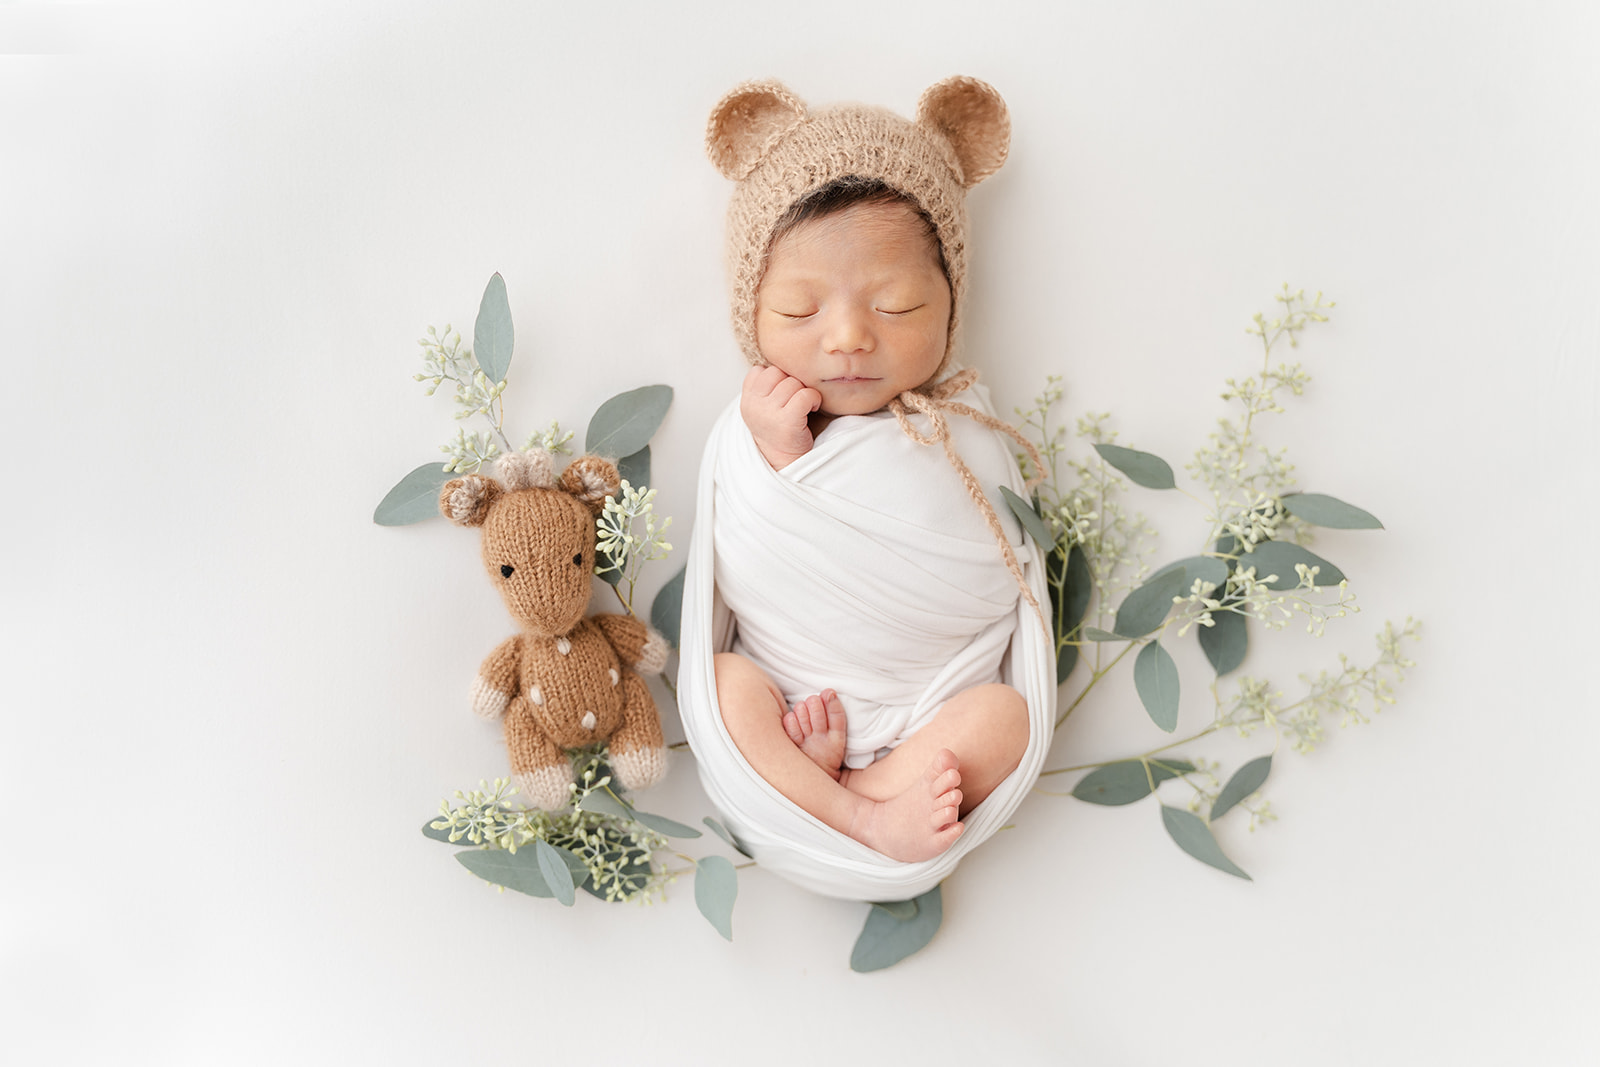 A newborn baby sleeps in a knit bonnet with bear ears in a studio thanks to Birthing Center Long Beach